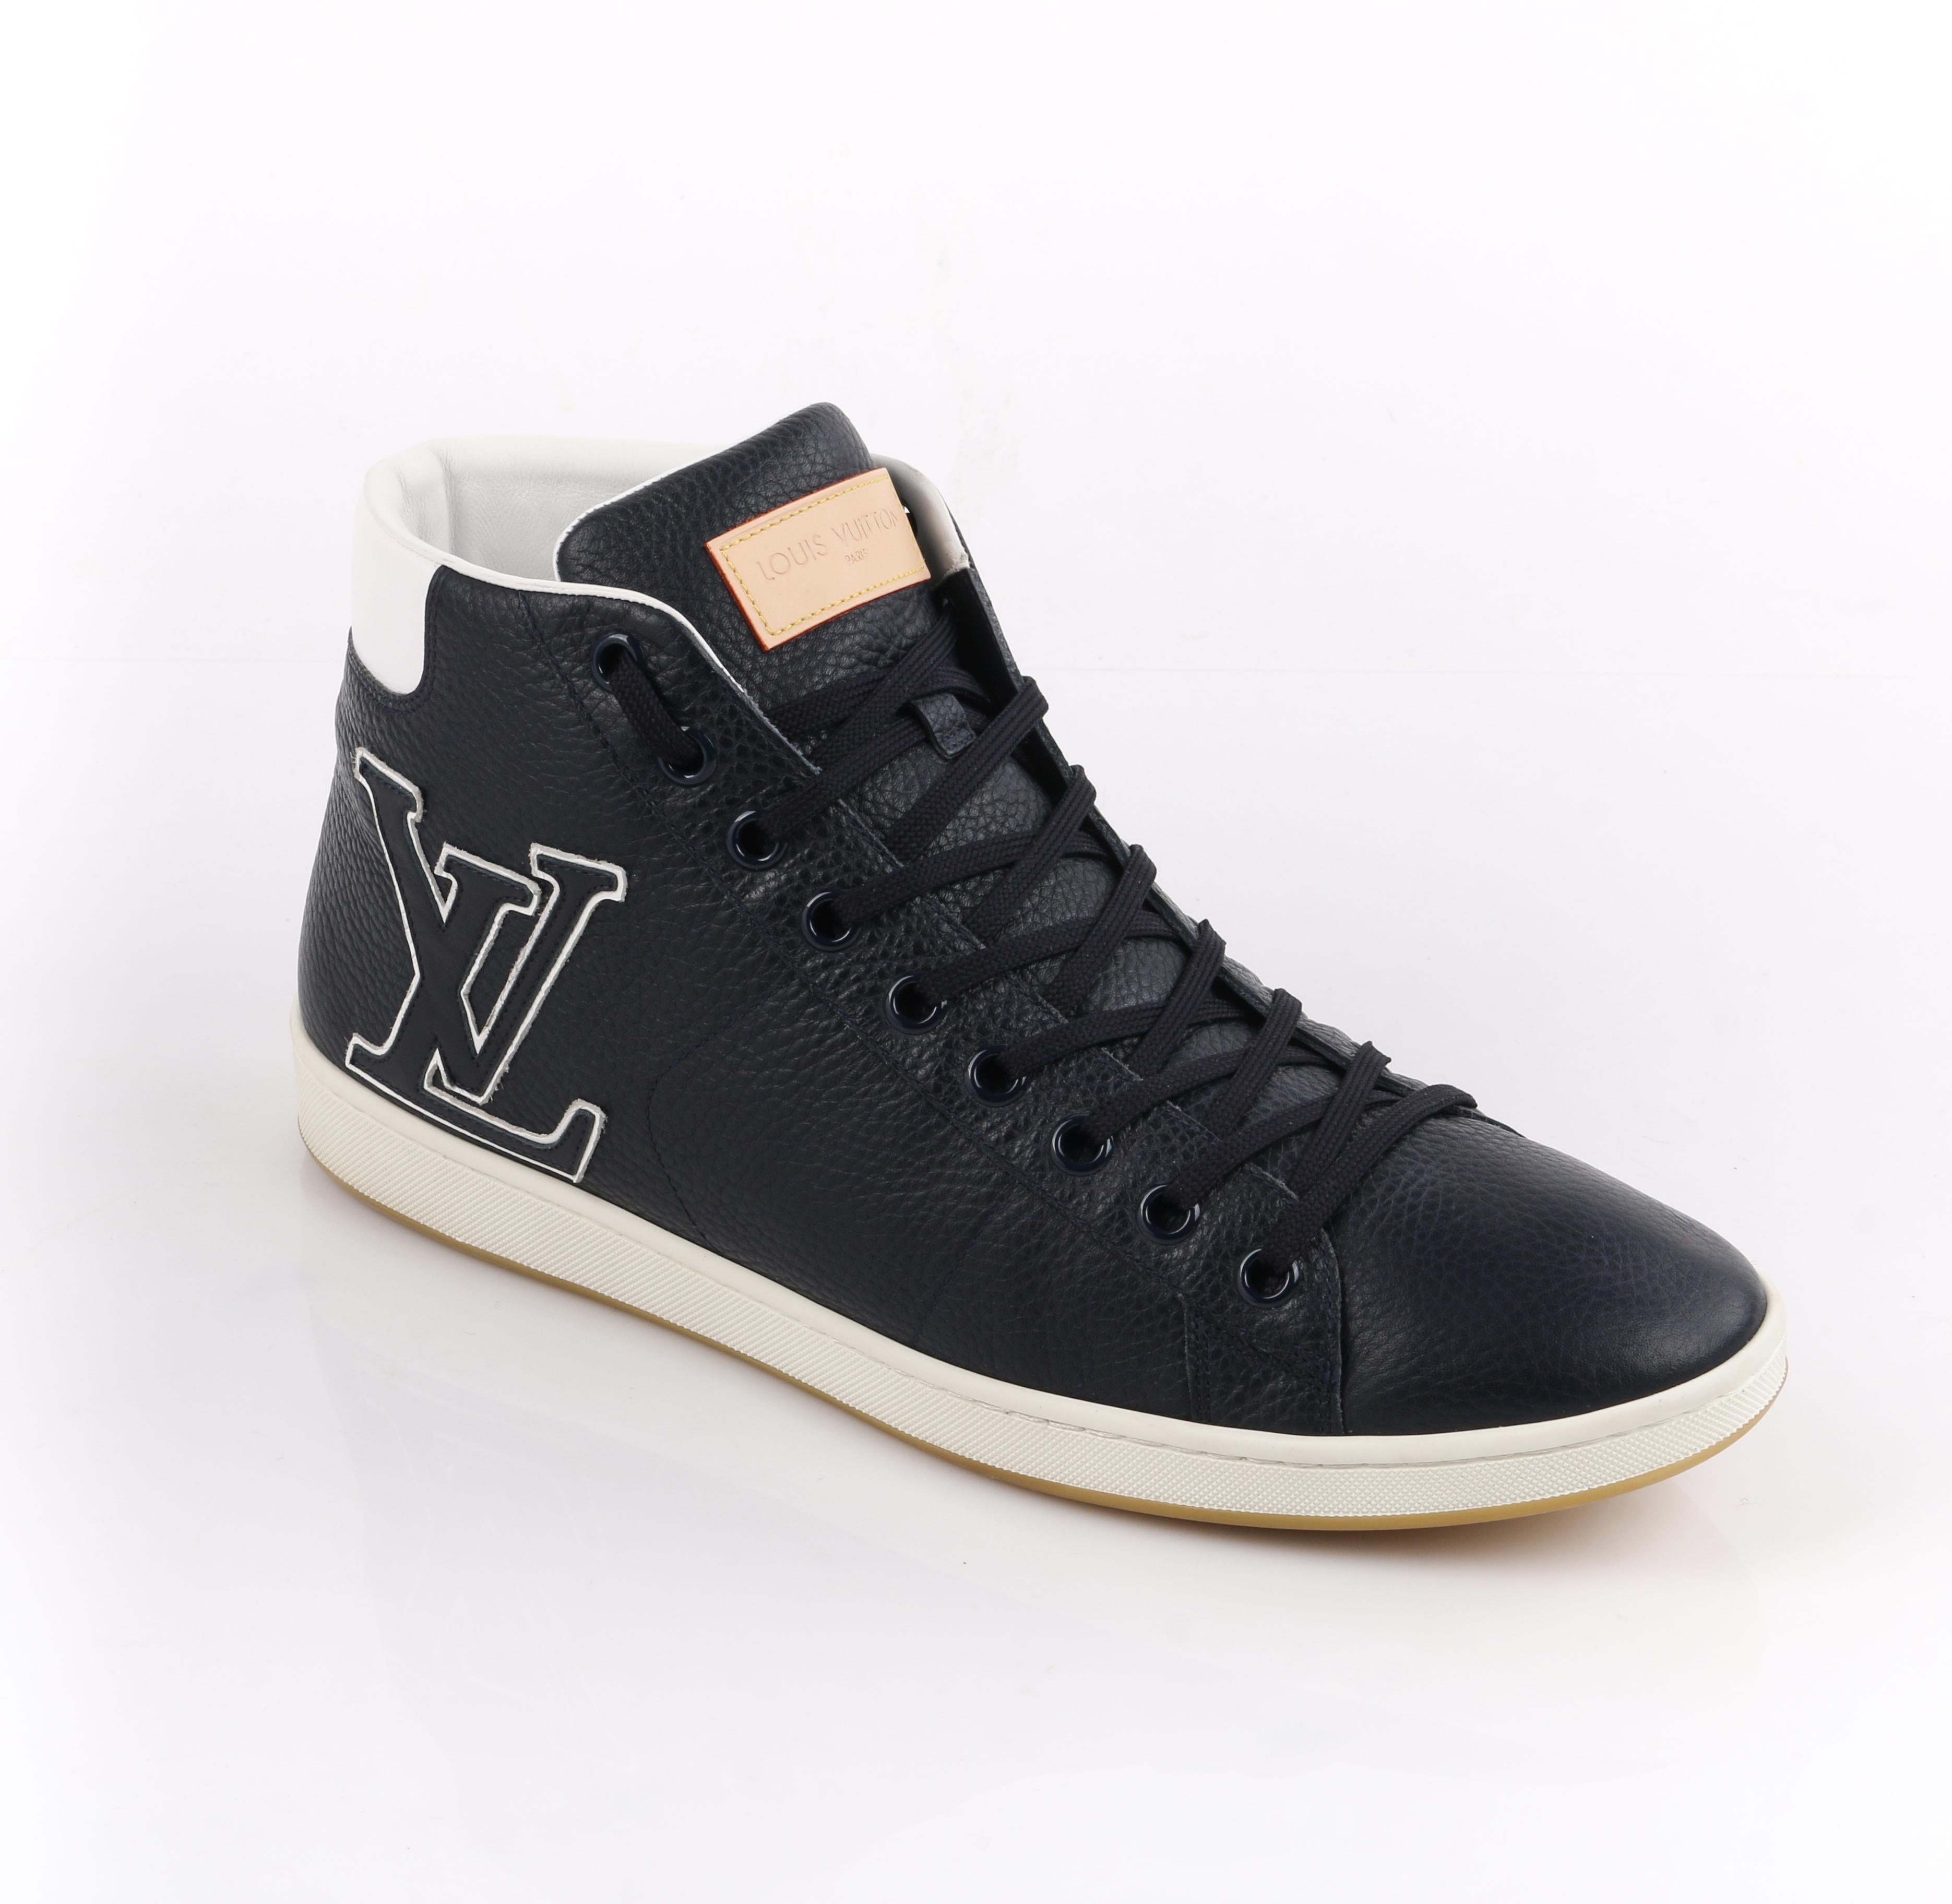 DESCRIPTION: LOUIS VUITTON Navy Blue Leather Tattoo LV Logo Monogram High Top Sneakers  
 
Brand / Manufacturer: Louis Vuitton
Style: High Top Sneaker
Color(s): Navy Blue and white
Lined: Yes
Marked Fabric Content: Upper and lining: leather; sole: